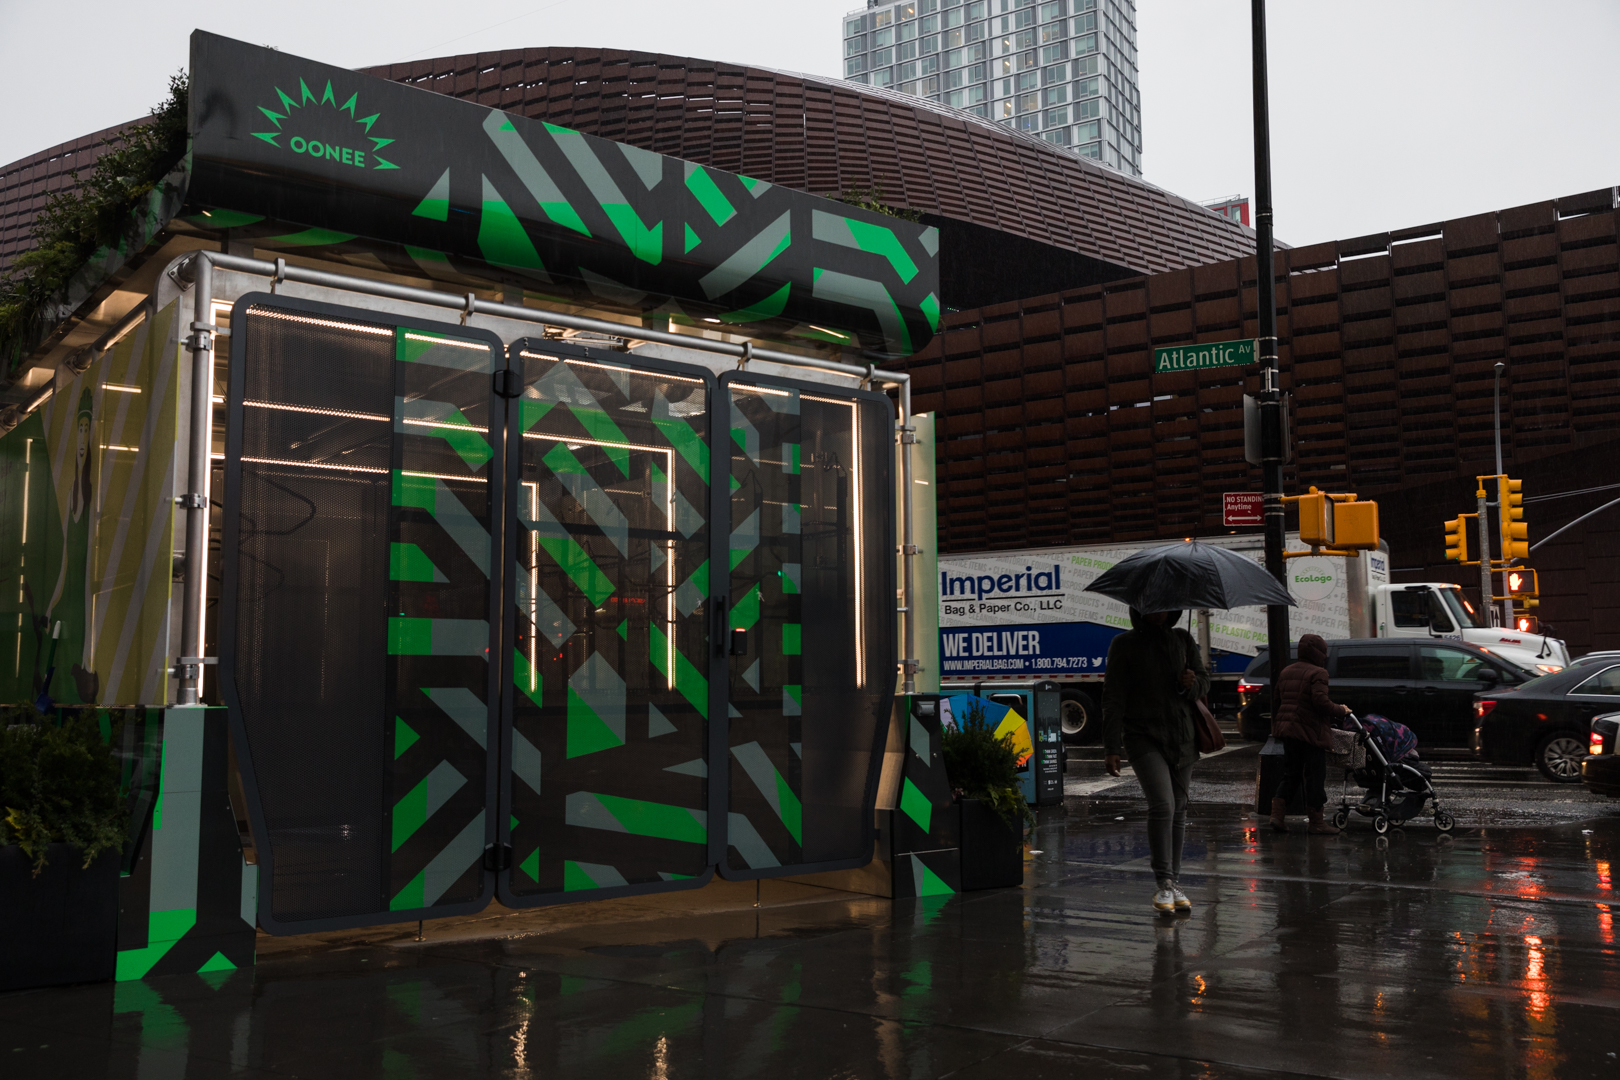 Brooklyn's Oonee Pod bicycle parking hub outside Atlantic Terminal offers space for 20 bicycles. Photo: Paul Frangipane/Brooklyn Eagle